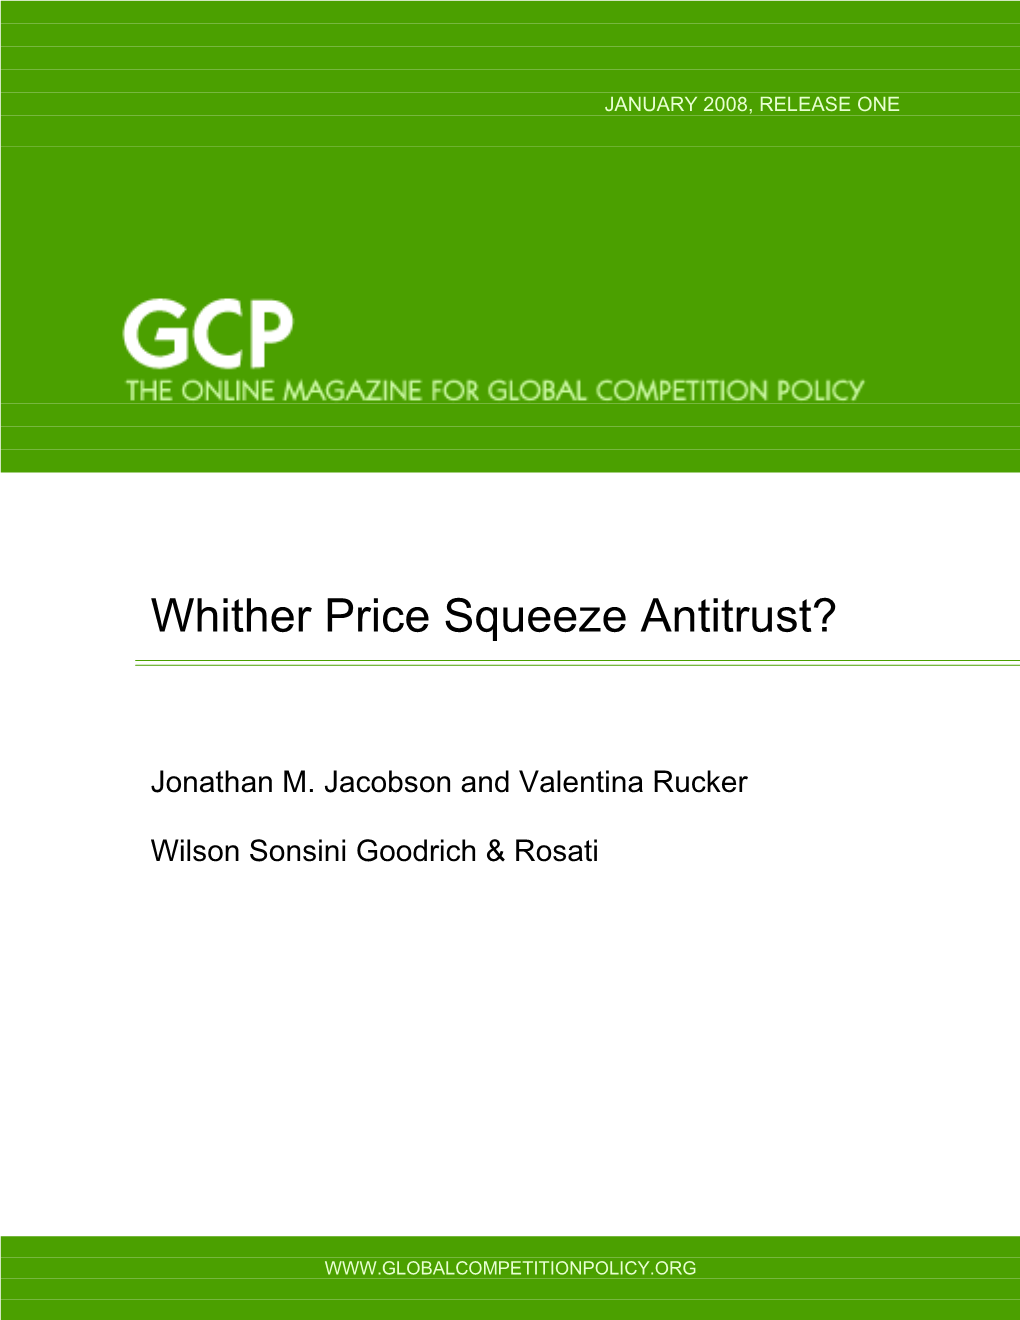 Whither Price Squeeze Antitrust?